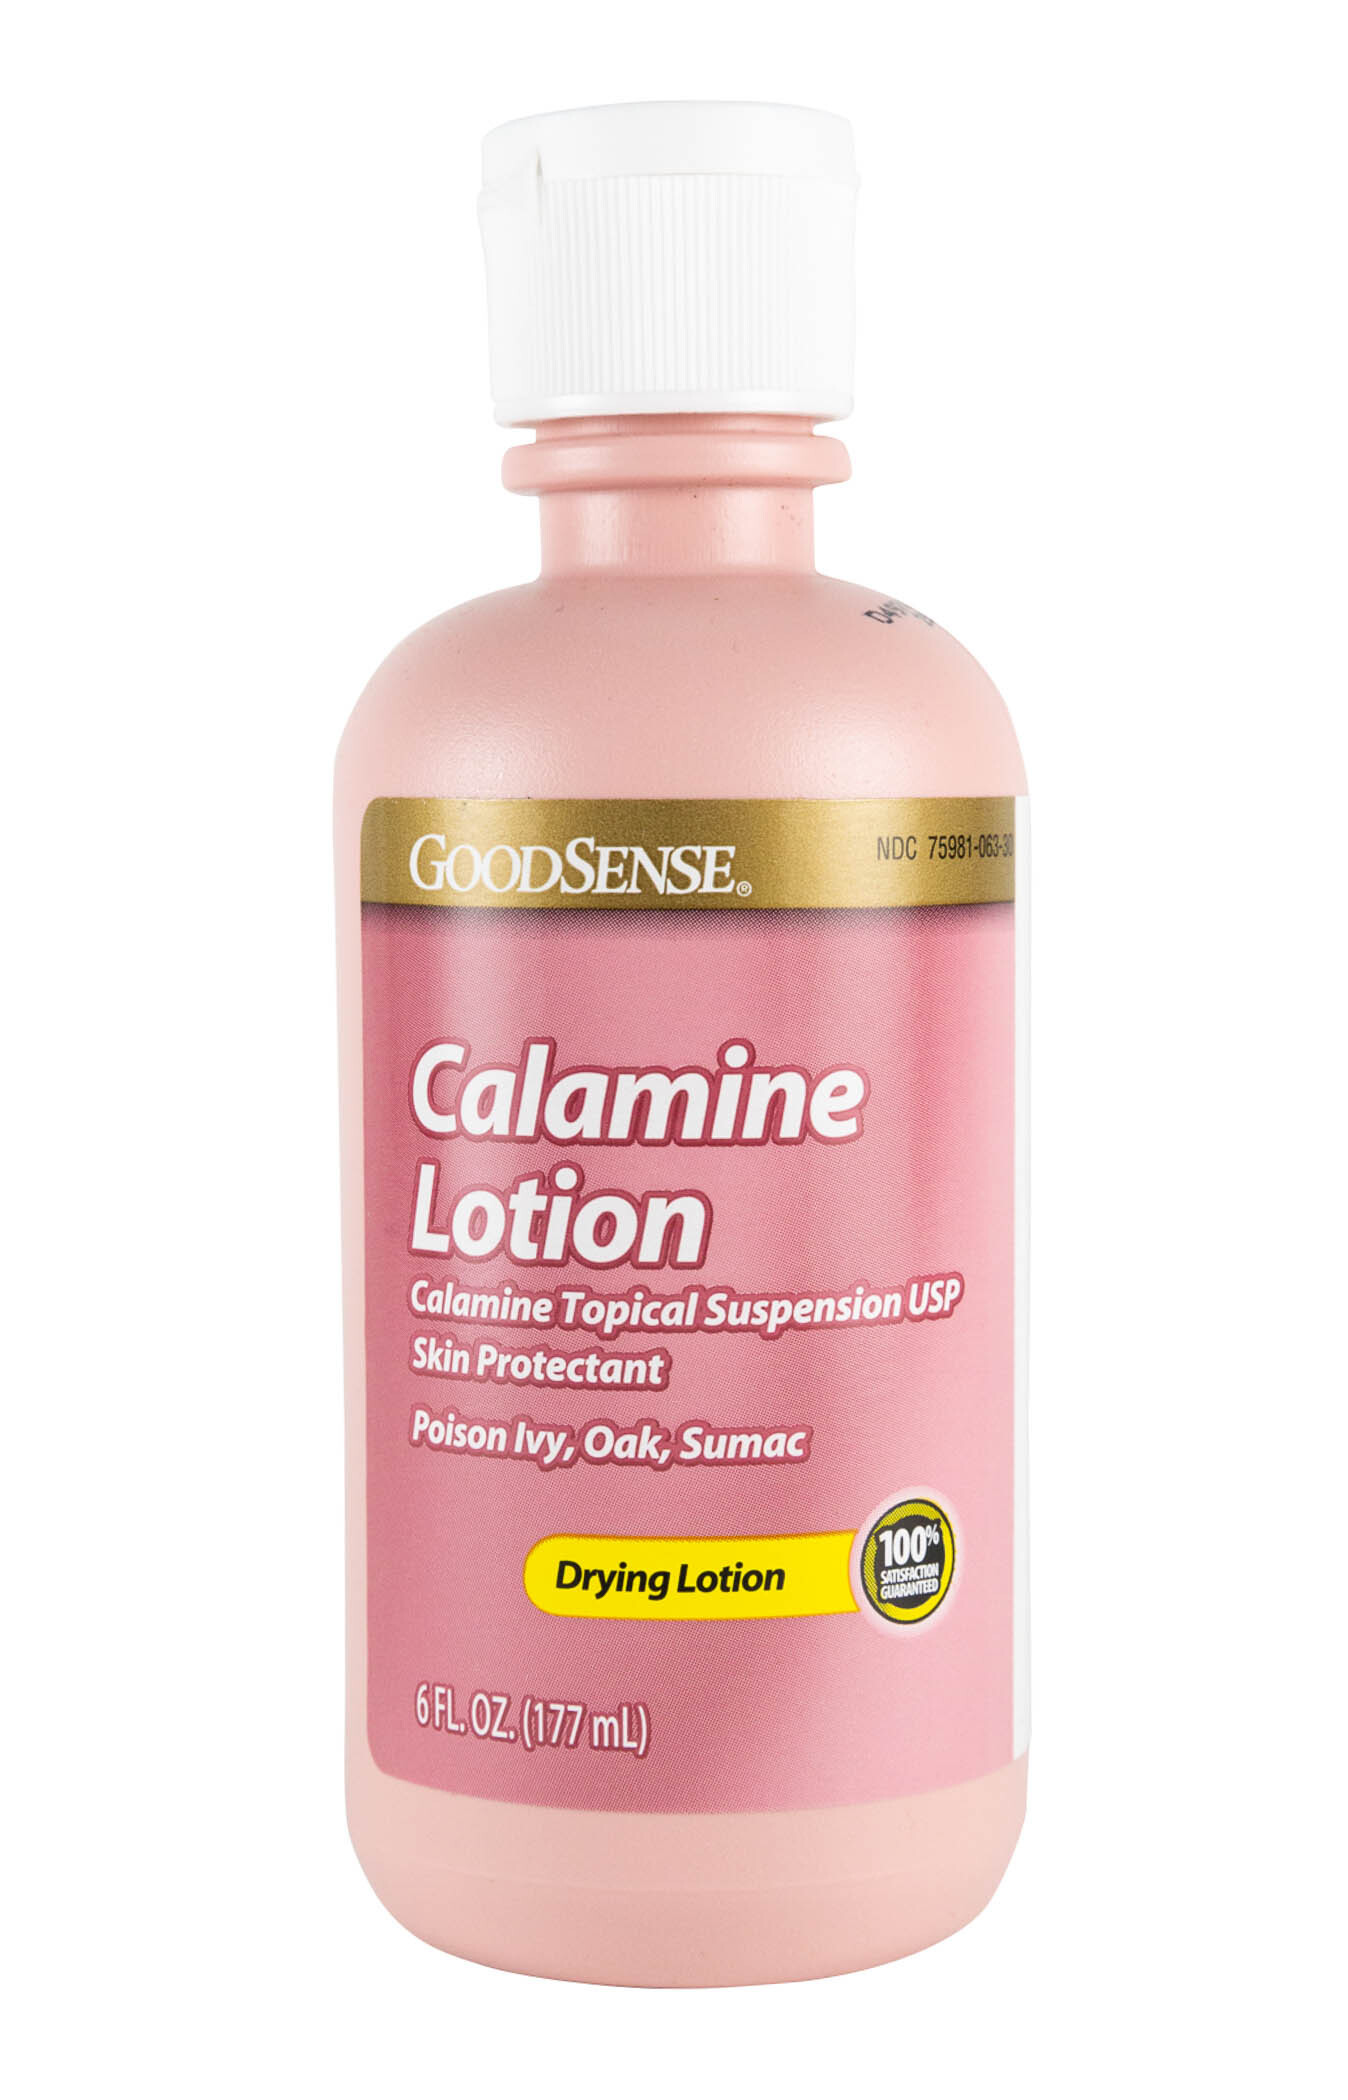 Calamine Lotion On Baby Face | lupon.gov.ph